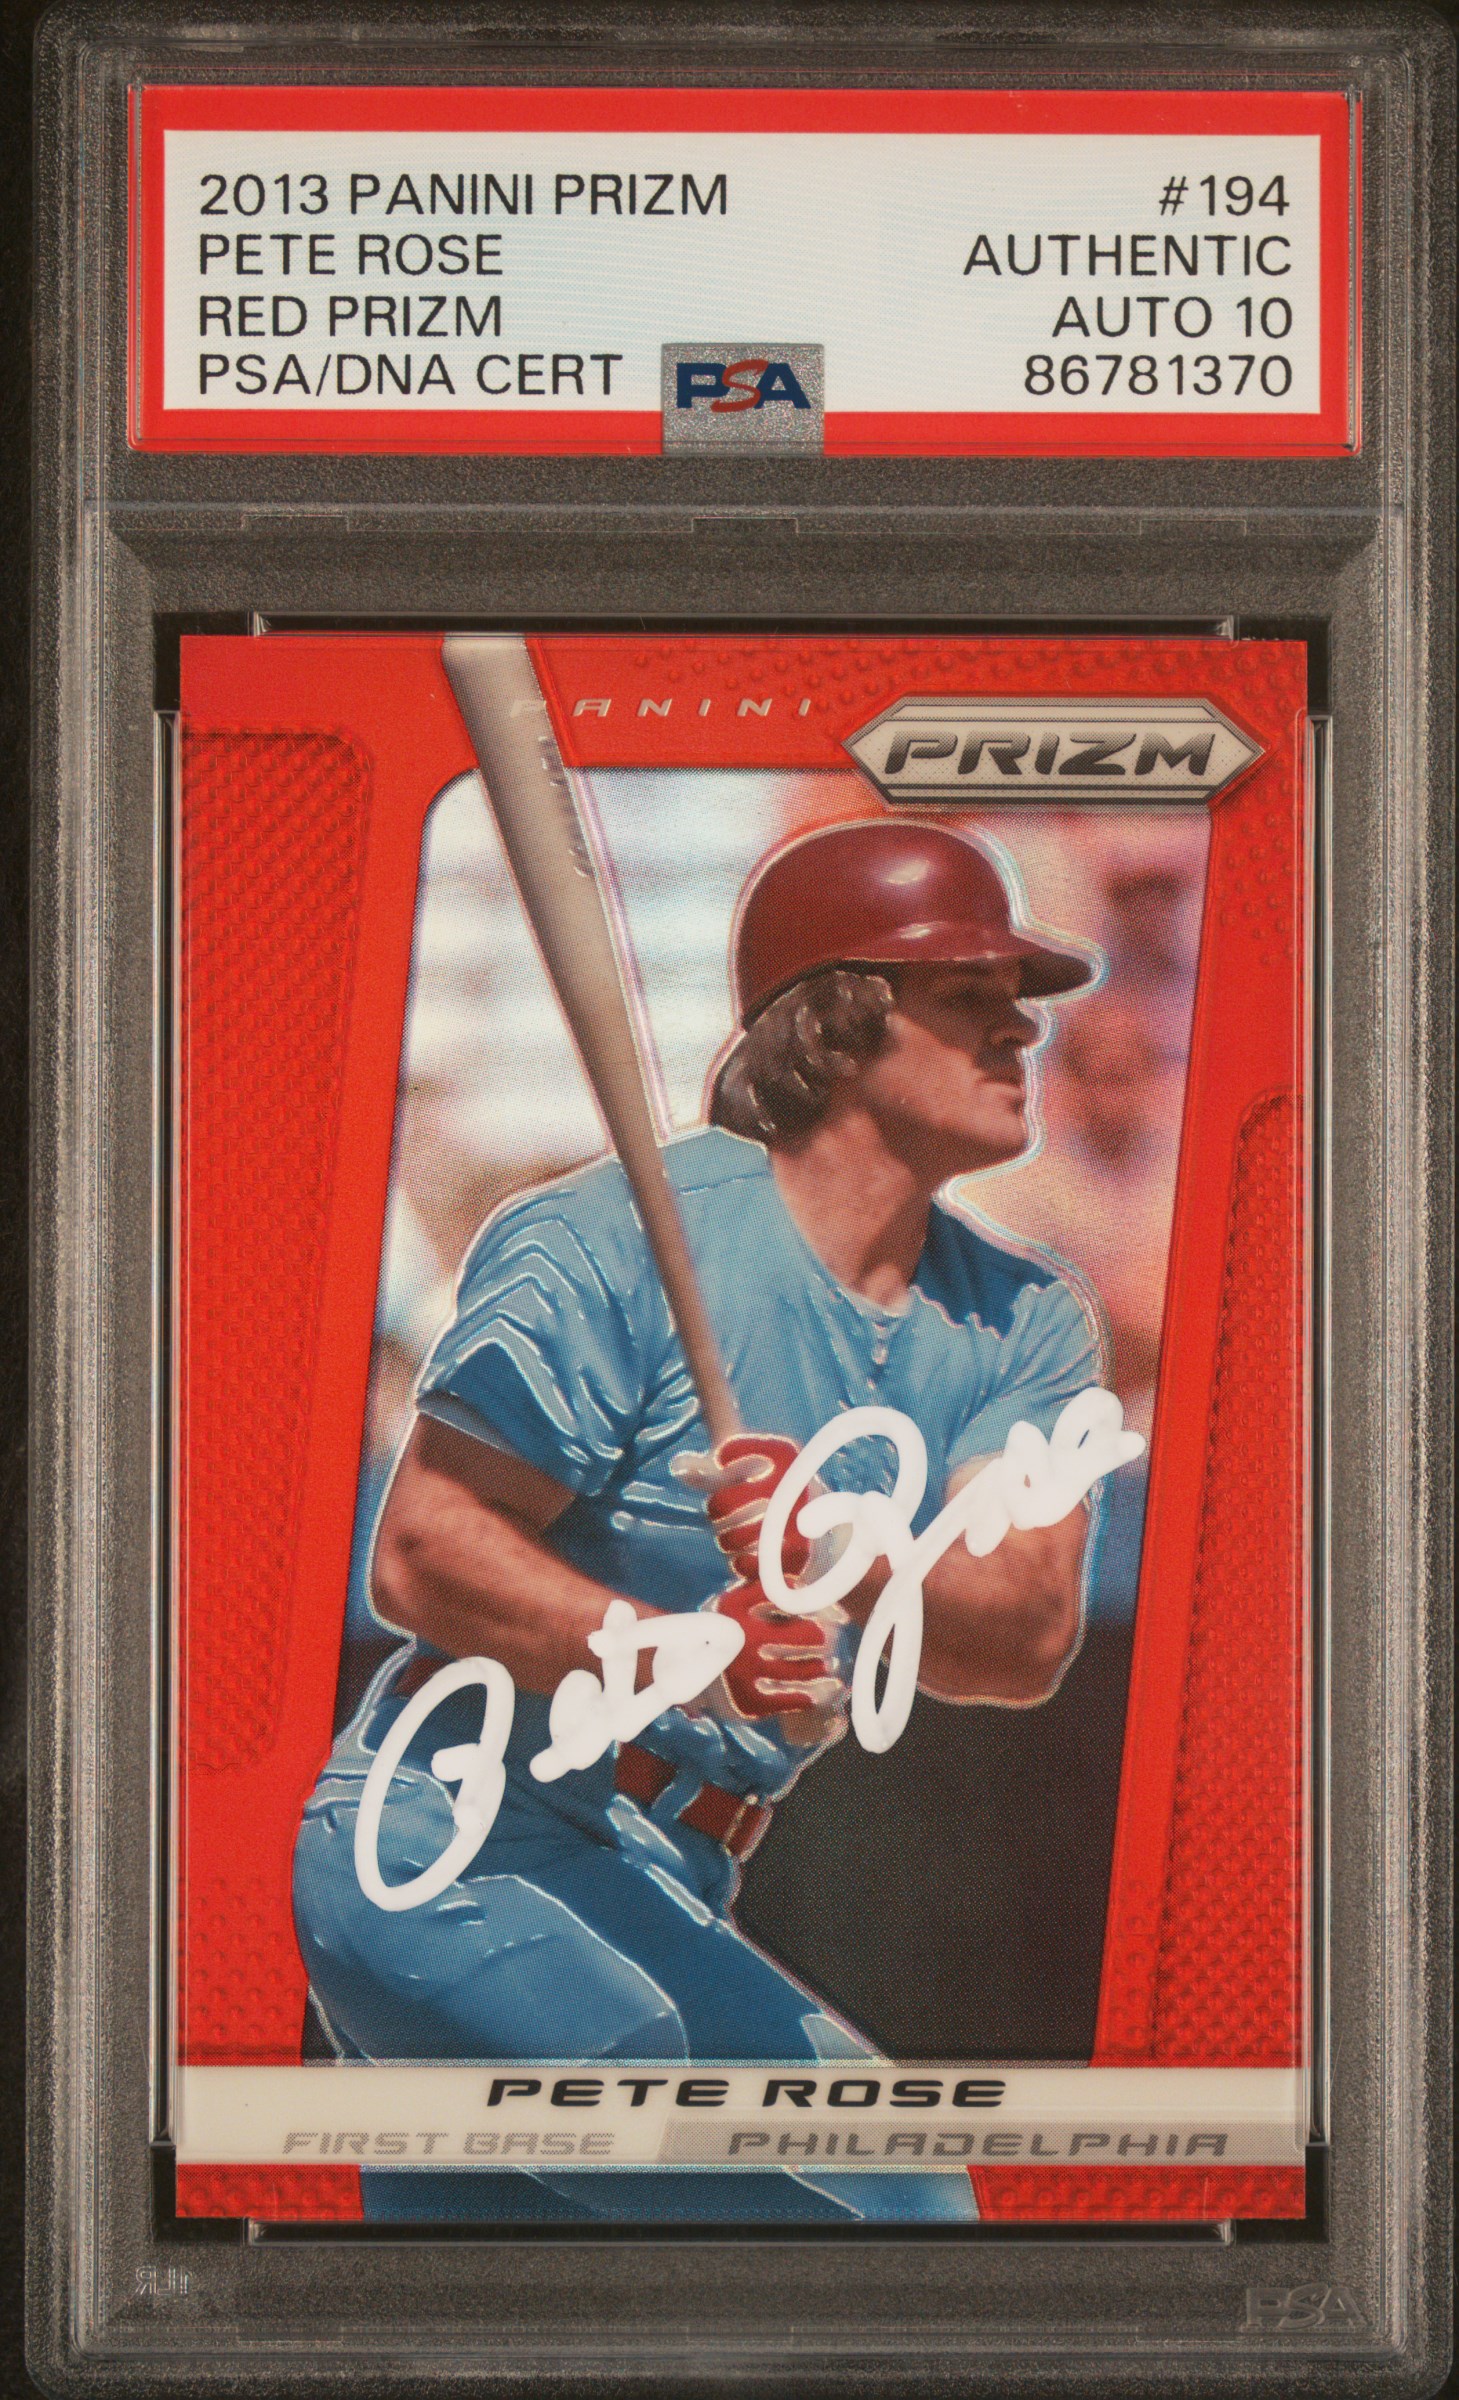 Pete Rose 2013 Panini Prizm Red Signed Card #194 Auto Graded PSA 10 86781370